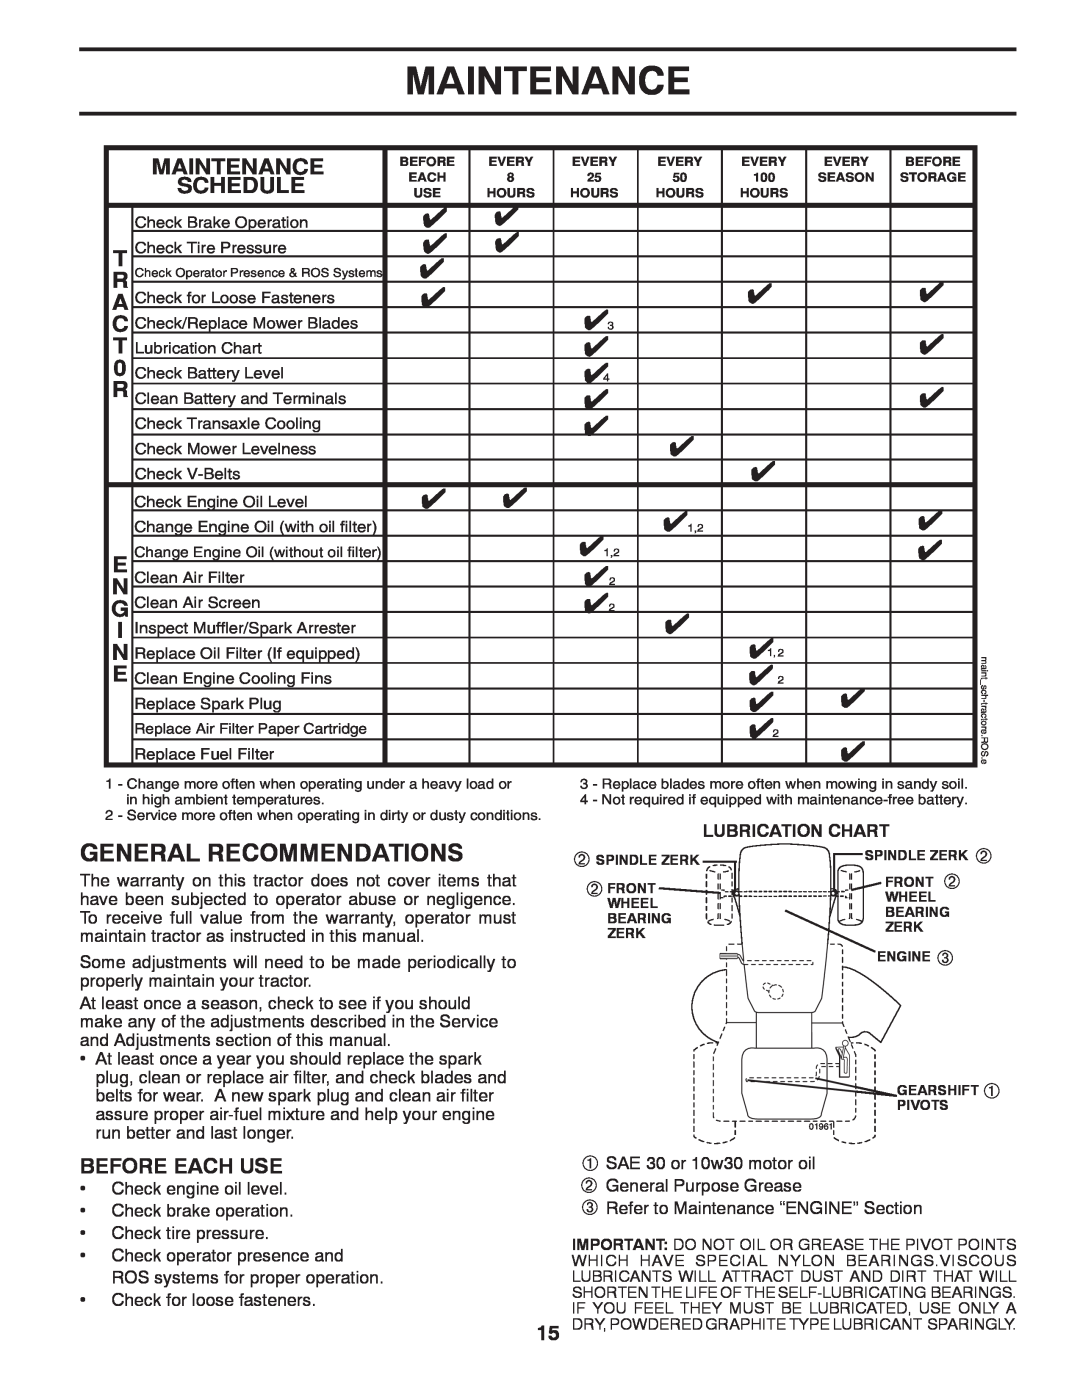 Poulan PBA19542LT manual Maintenance, General Recommendations, Schedule, Before Each Use 